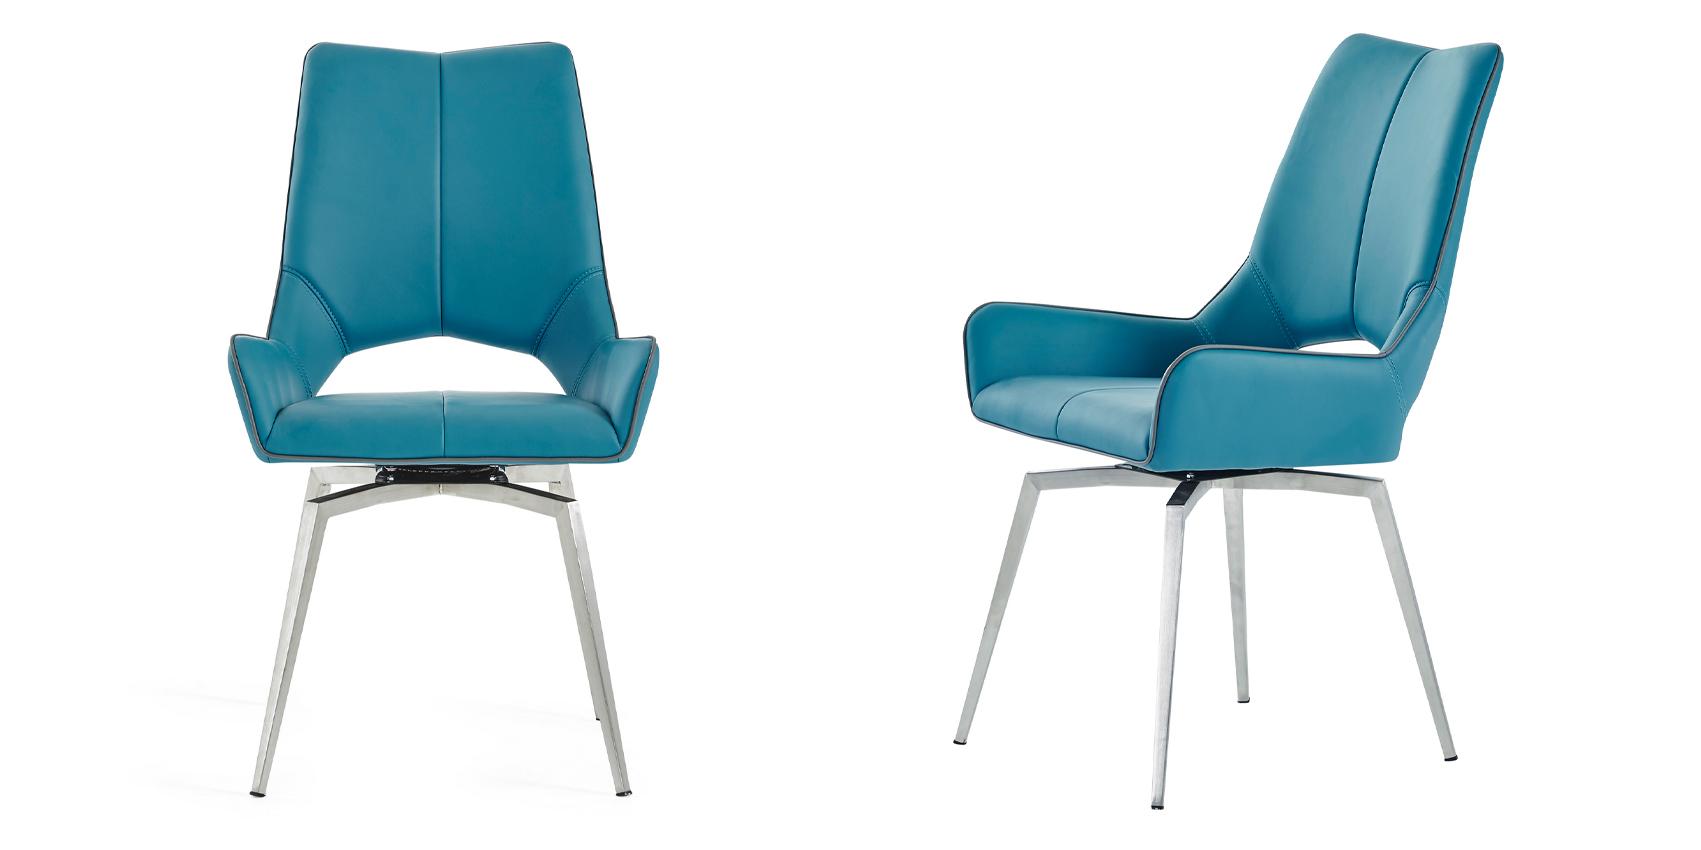 Contemporary, Transitional Dining Chair Set D4878NDC- TURQ D4878NDC- TURQ-Set-2 in Turquoise, Silver Polyurethane